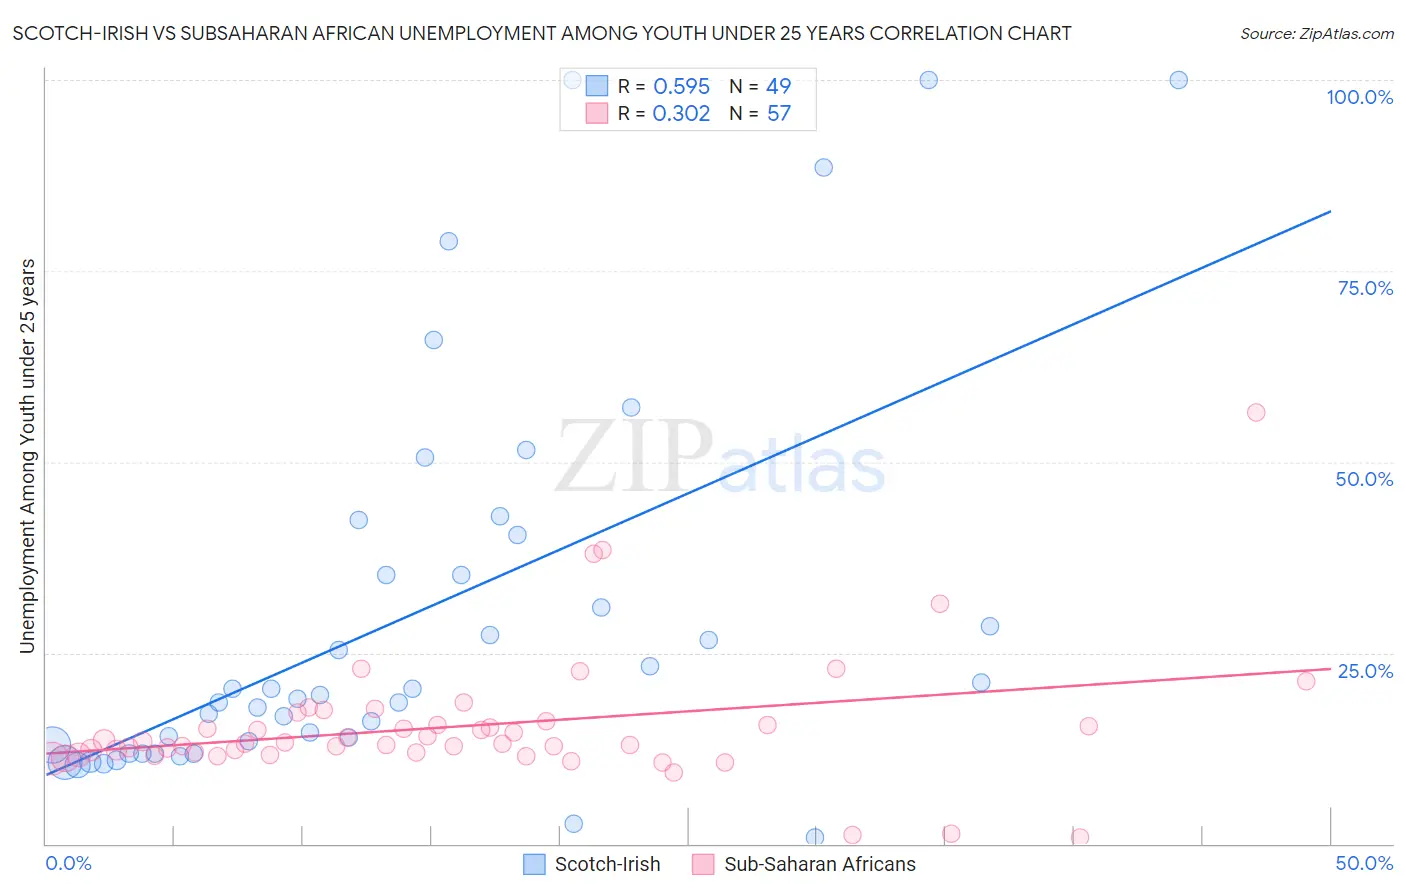 Scotch-Irish vs Subsaharan African Unemployment Among Youth under 25 years